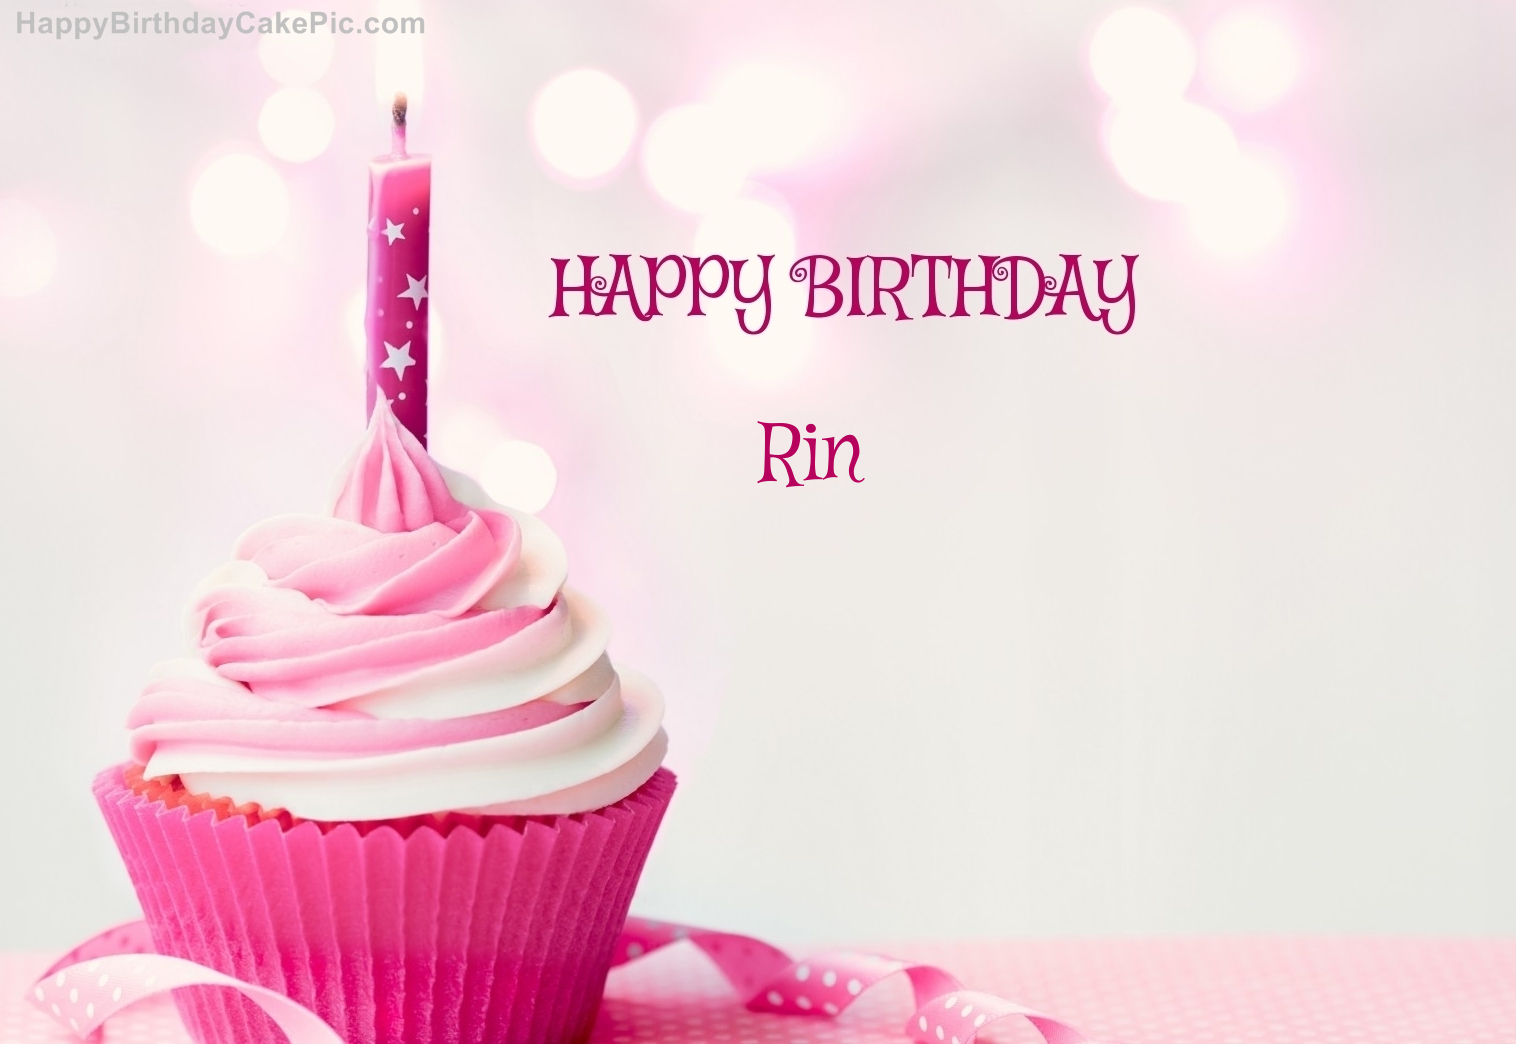 Happy Birthday Cupcake Candle Pink Cake For Rin